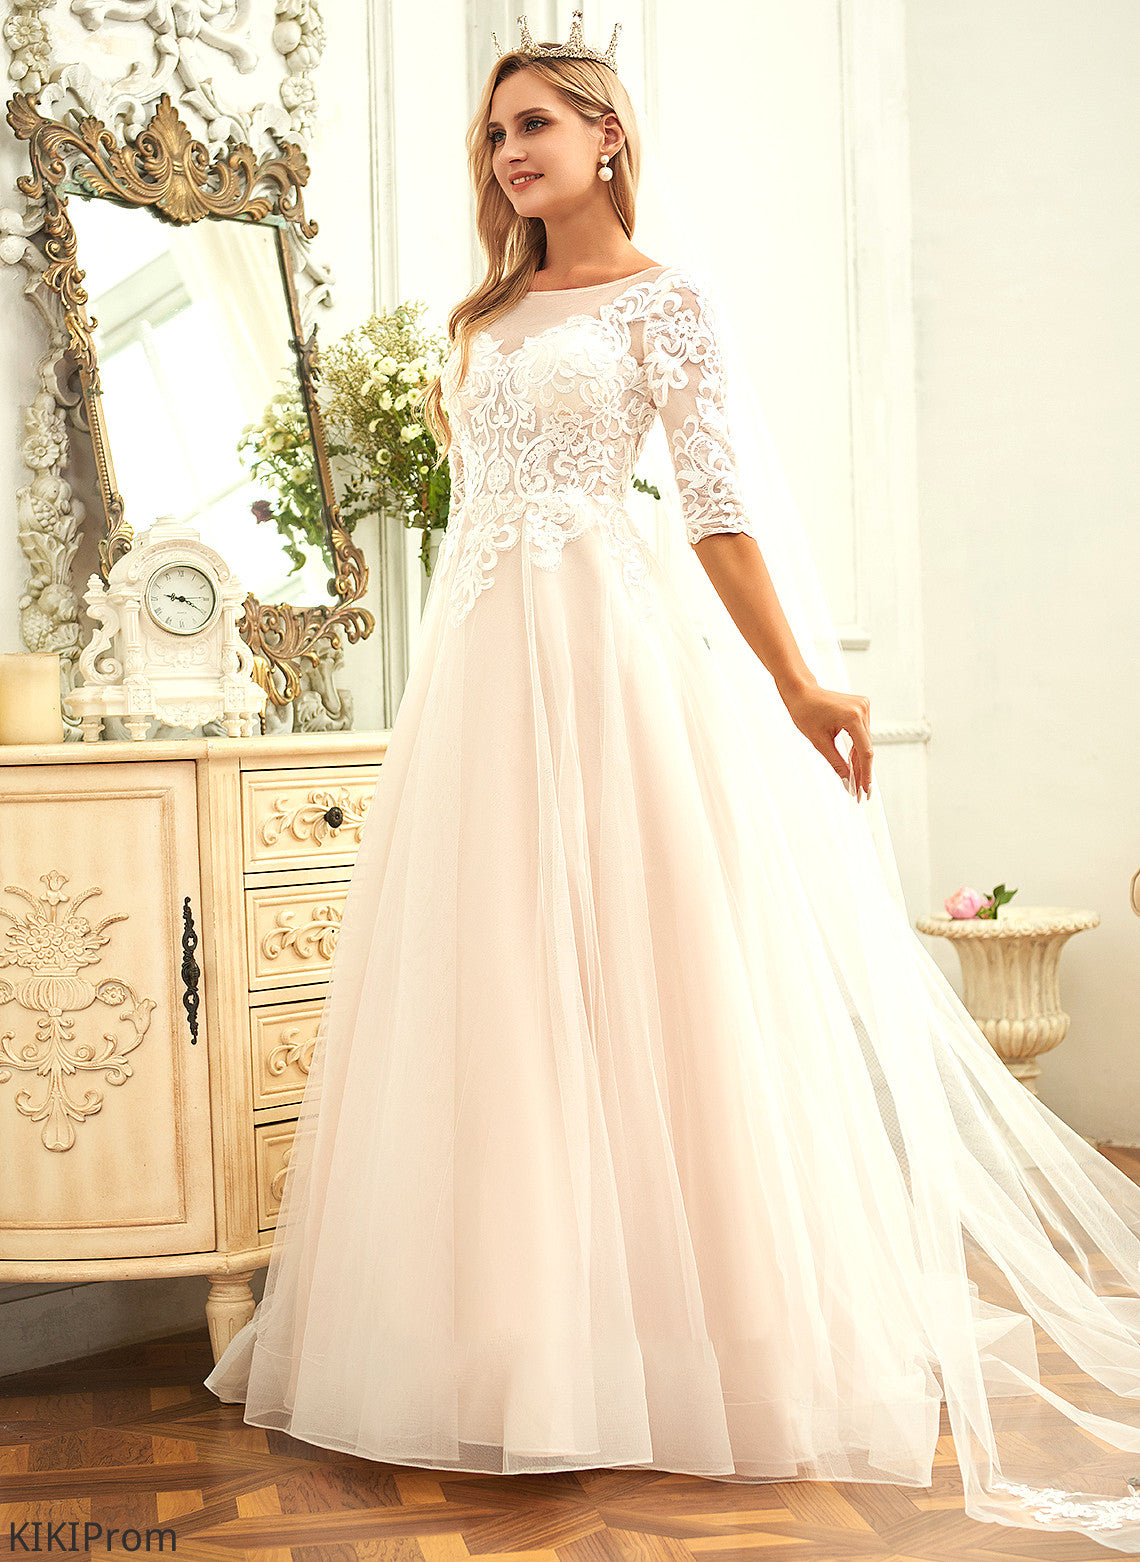 Dress Sweep Wedding Dresses Neck Lace Diana Train Wedding Ball-Gown/Princess Tulle Scoop